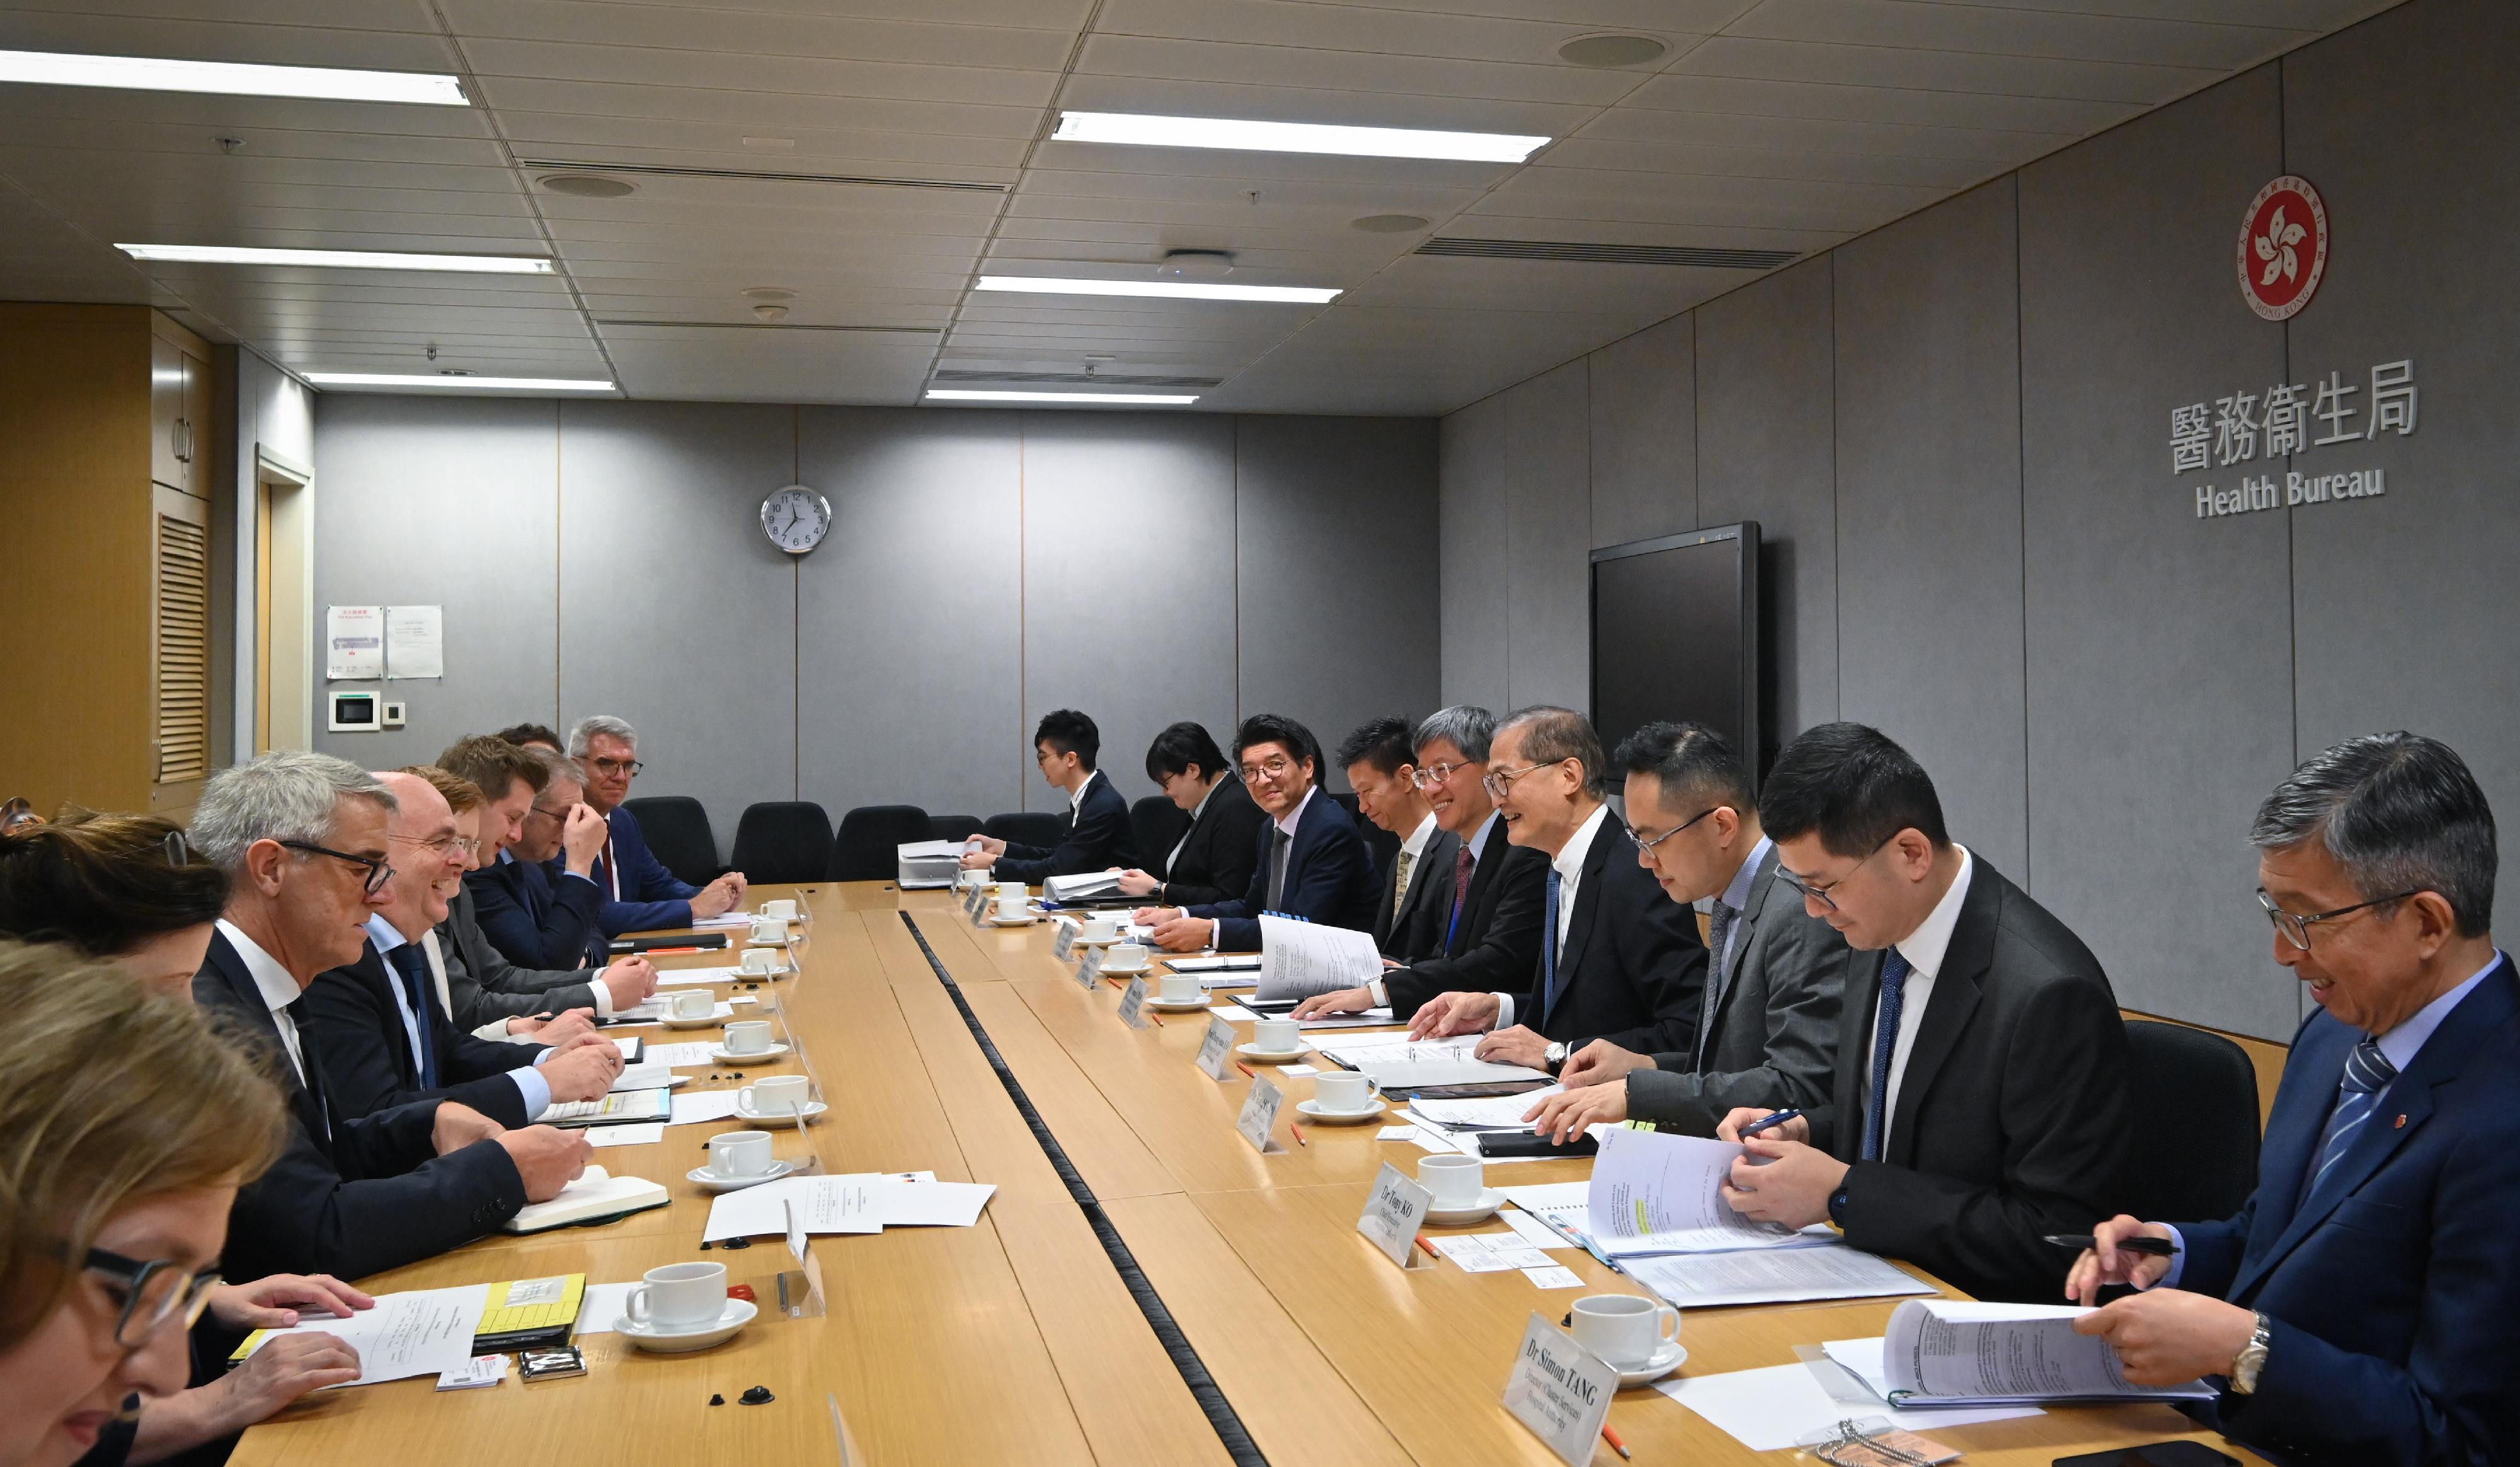 The Secretary for Health, Professor Lo Chung-mau (fourth right), met with a delegation led by Parliamentary State Secretary to the Federal Minister of Health of Germany Professor Edgar Franke (fourth left) today (May 18). The Permanent Secretary for Health, Mr Thomas Chan (fifth right); the Director of Health, Dr Ronald Lam (third right); Deputy Secretary for Health Mr Sam Hui (sixth right); the Commissioner for Primary Healthcare, Dr Pang Fei-chau (seventh right); and the Chief Executive of the Hospital Authority, Dr Tony Ko (second right), also attended.